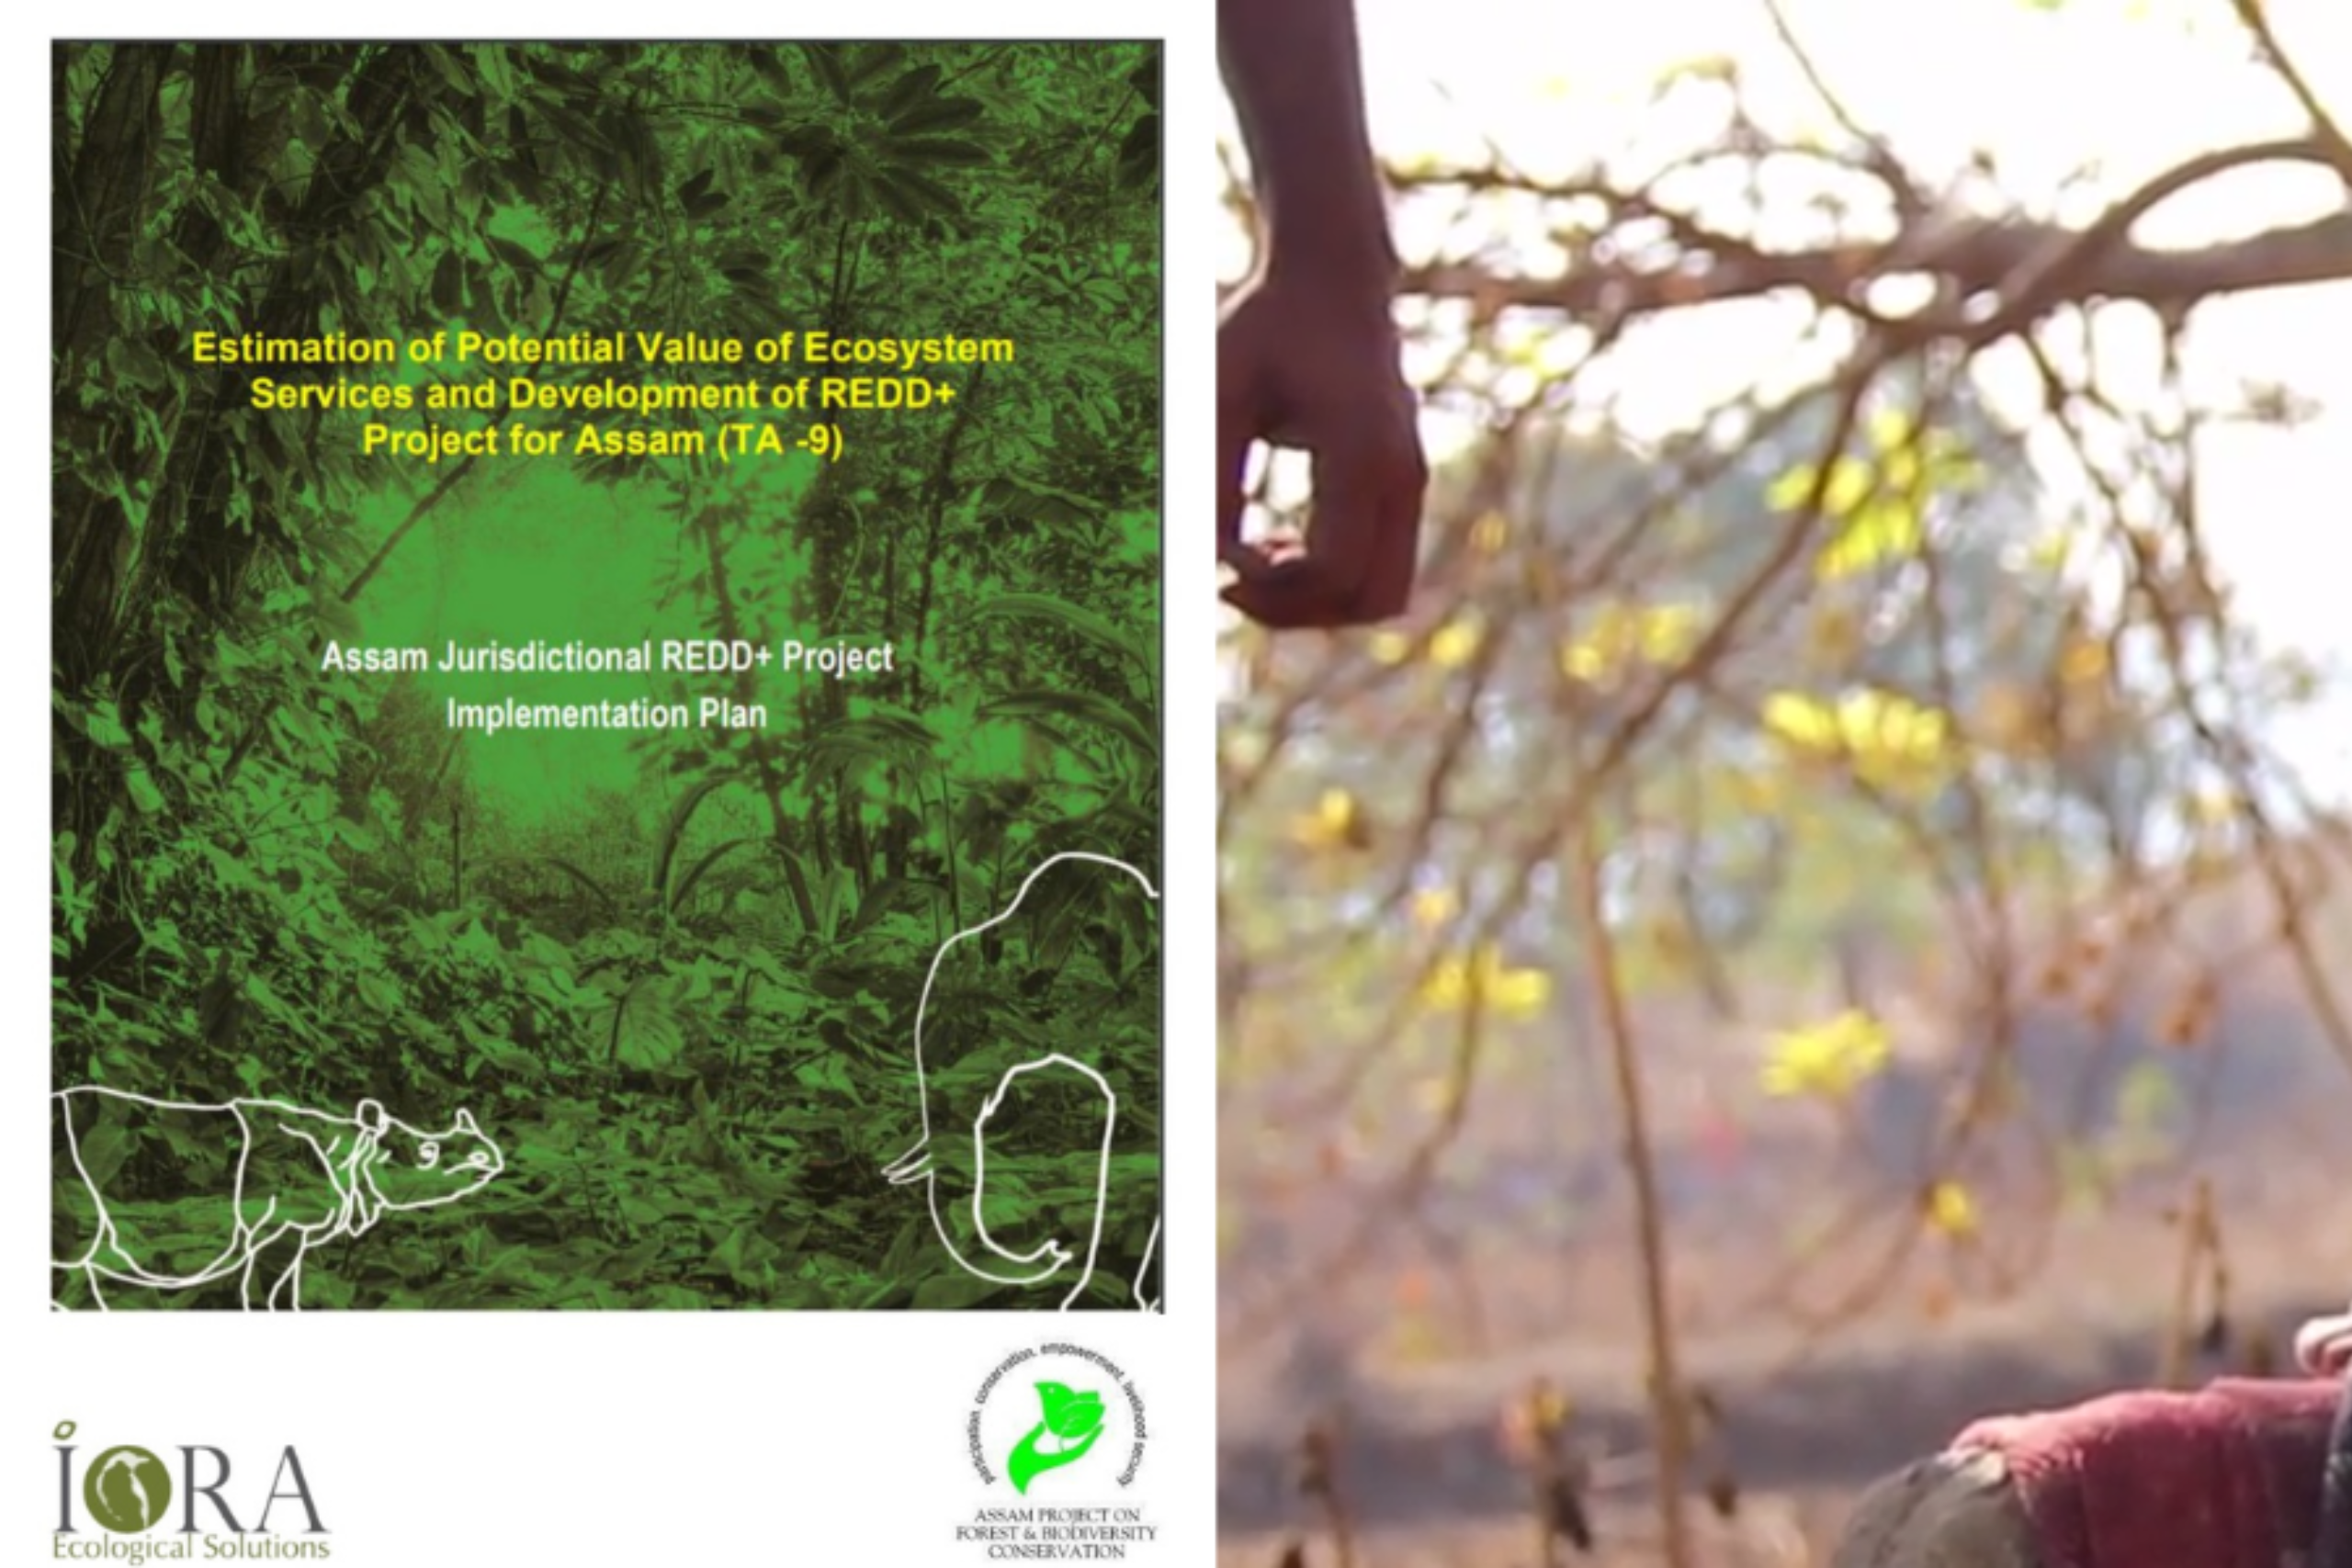 Community engagement for enhancing India’s climate resilience: Perspective from IORA’s REDD+ projects